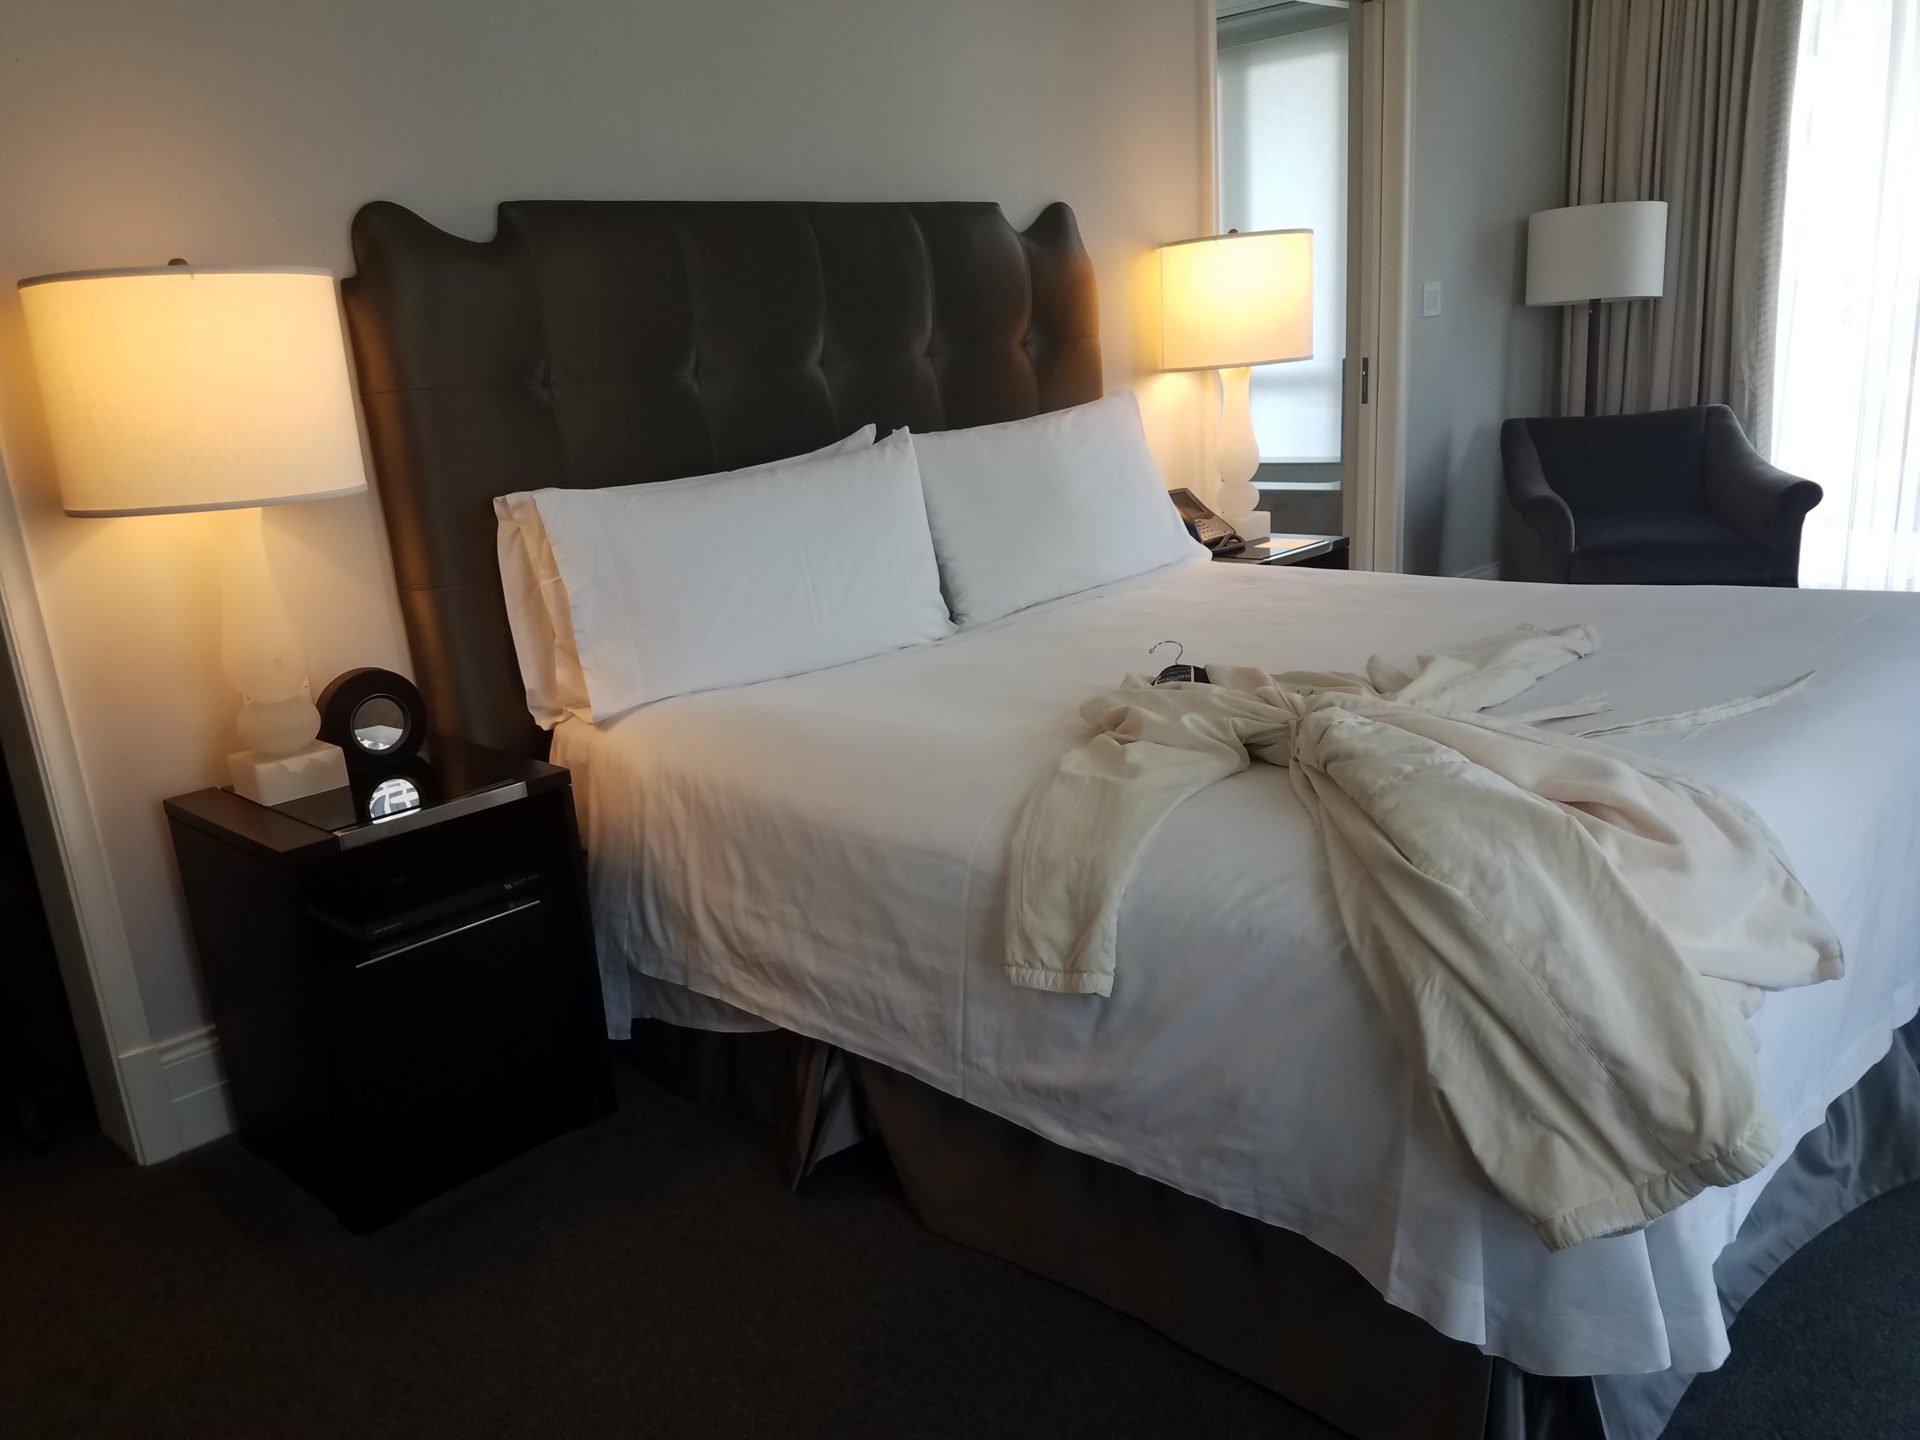 a bed with white sheets and a robe on it